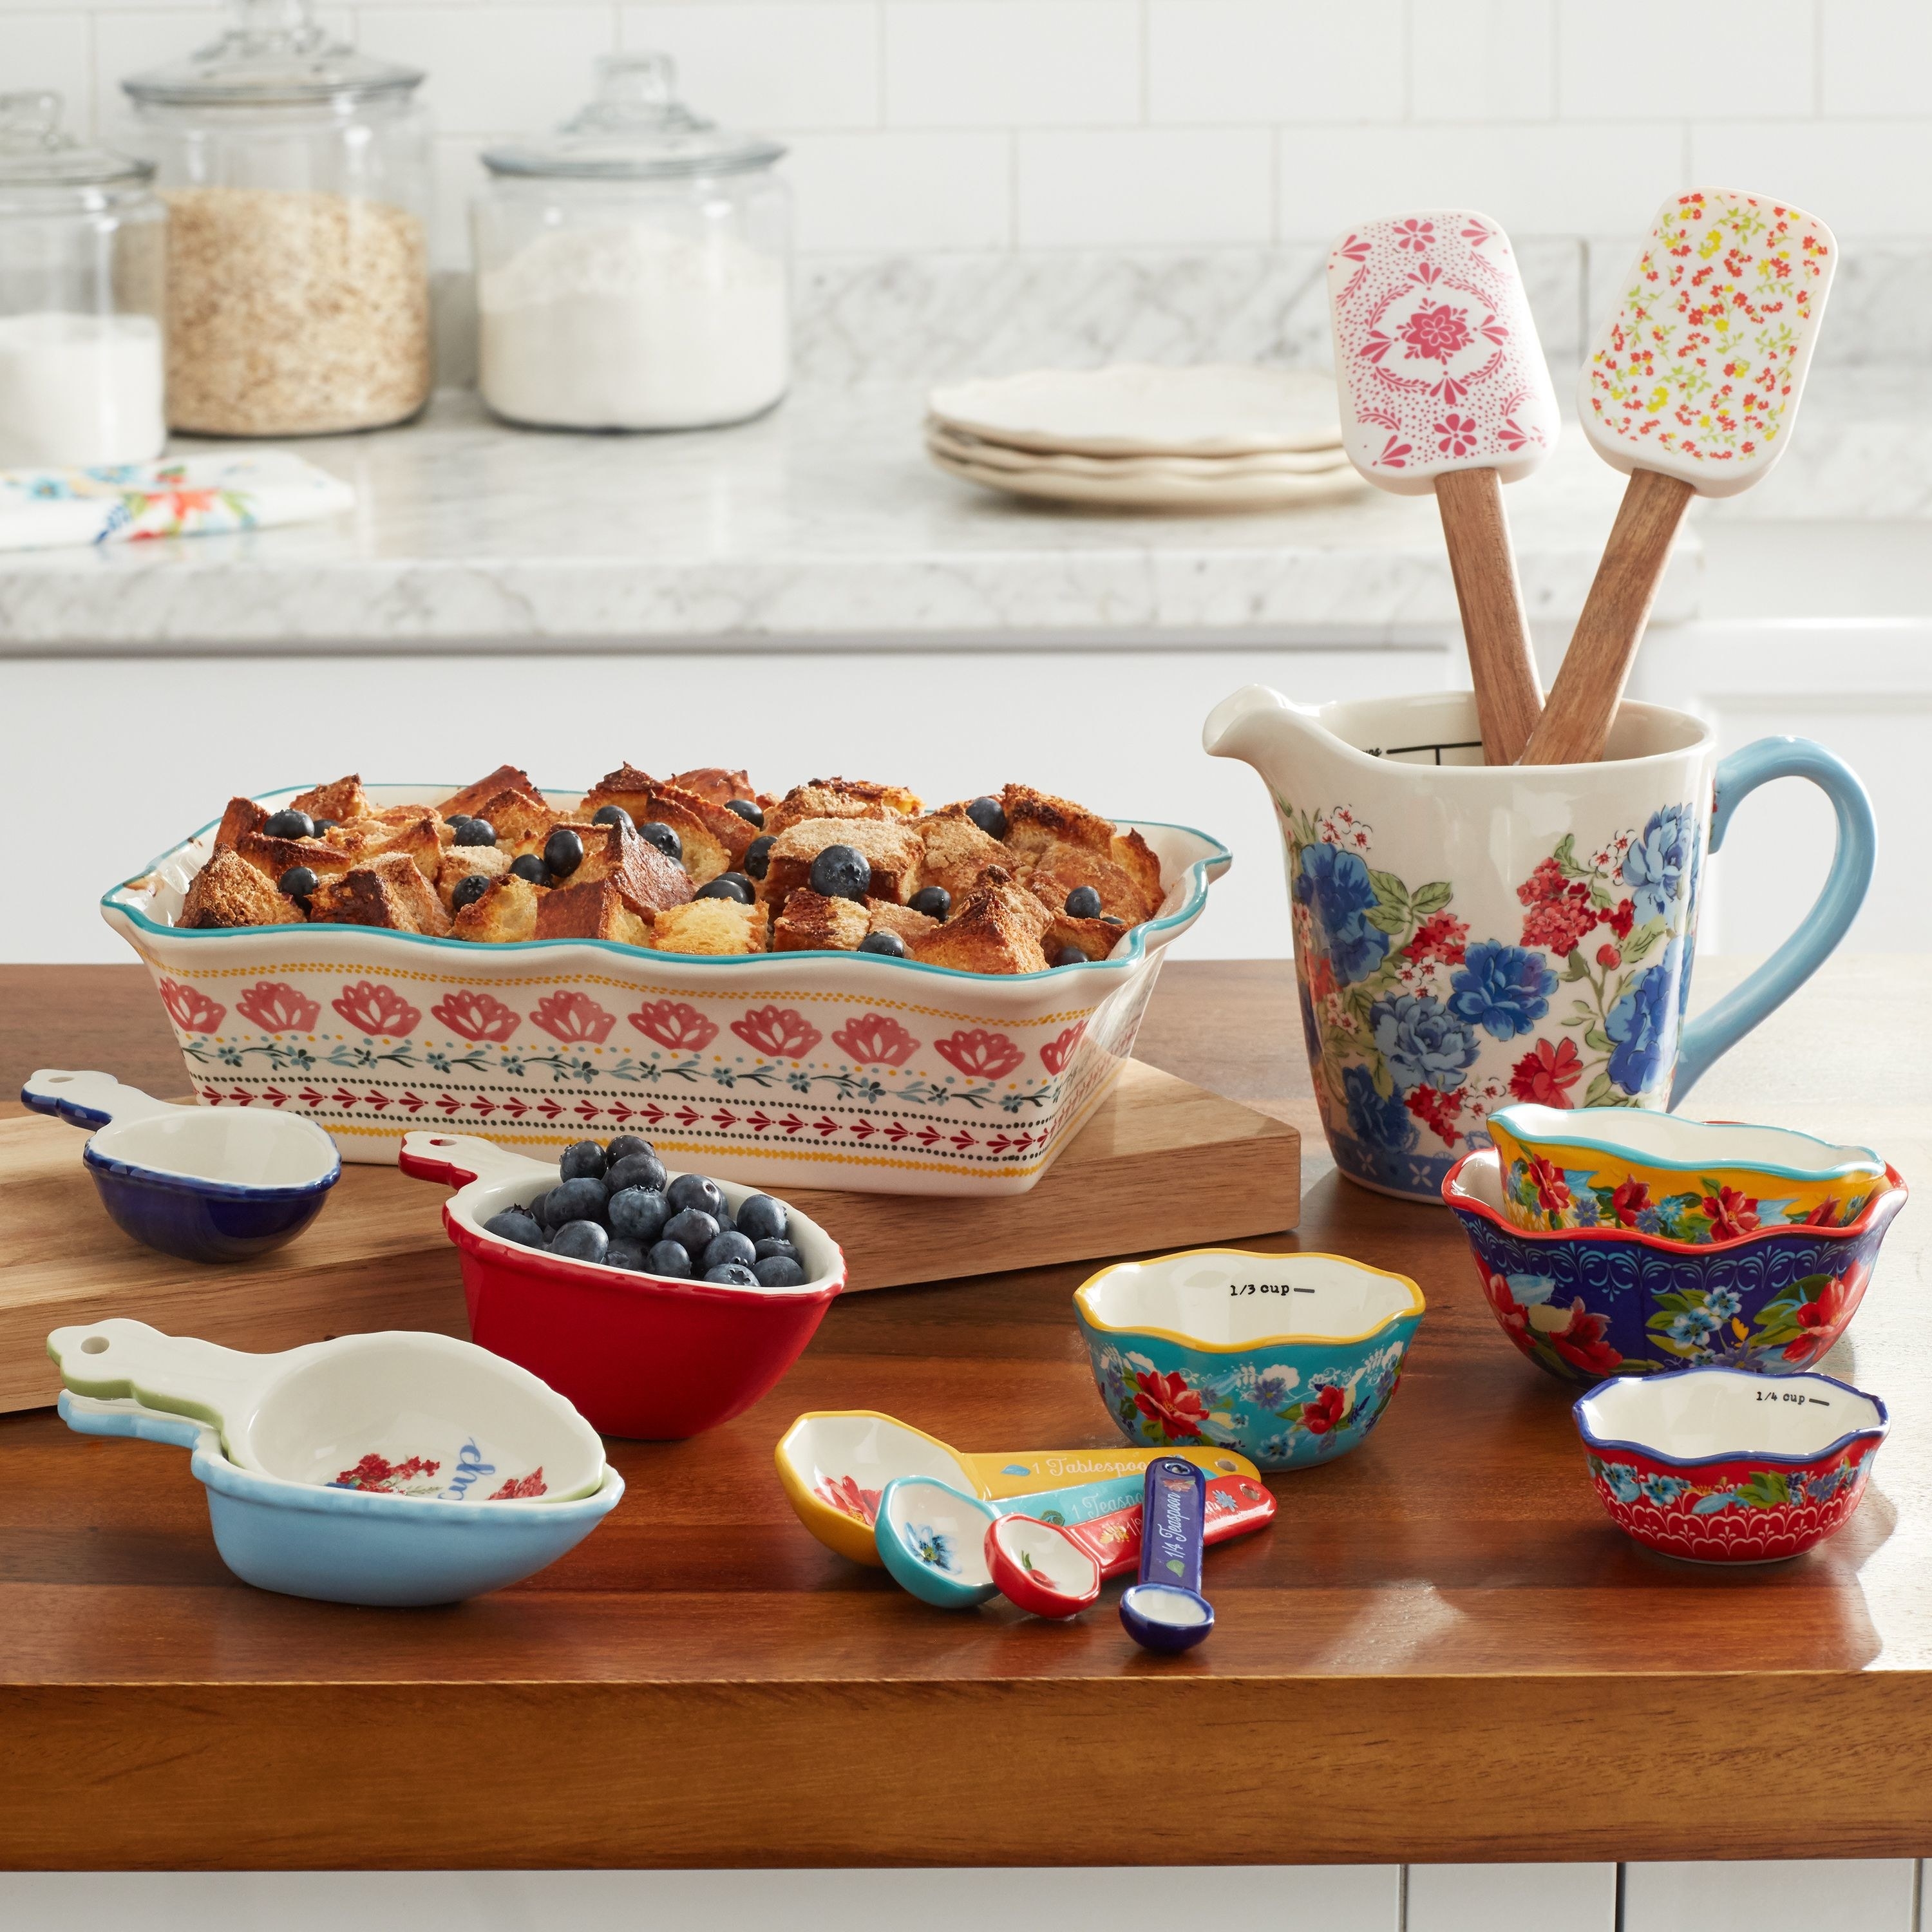 ceramic floral baking set including measuring spoons, cups, spoonulas, and a baking pan.